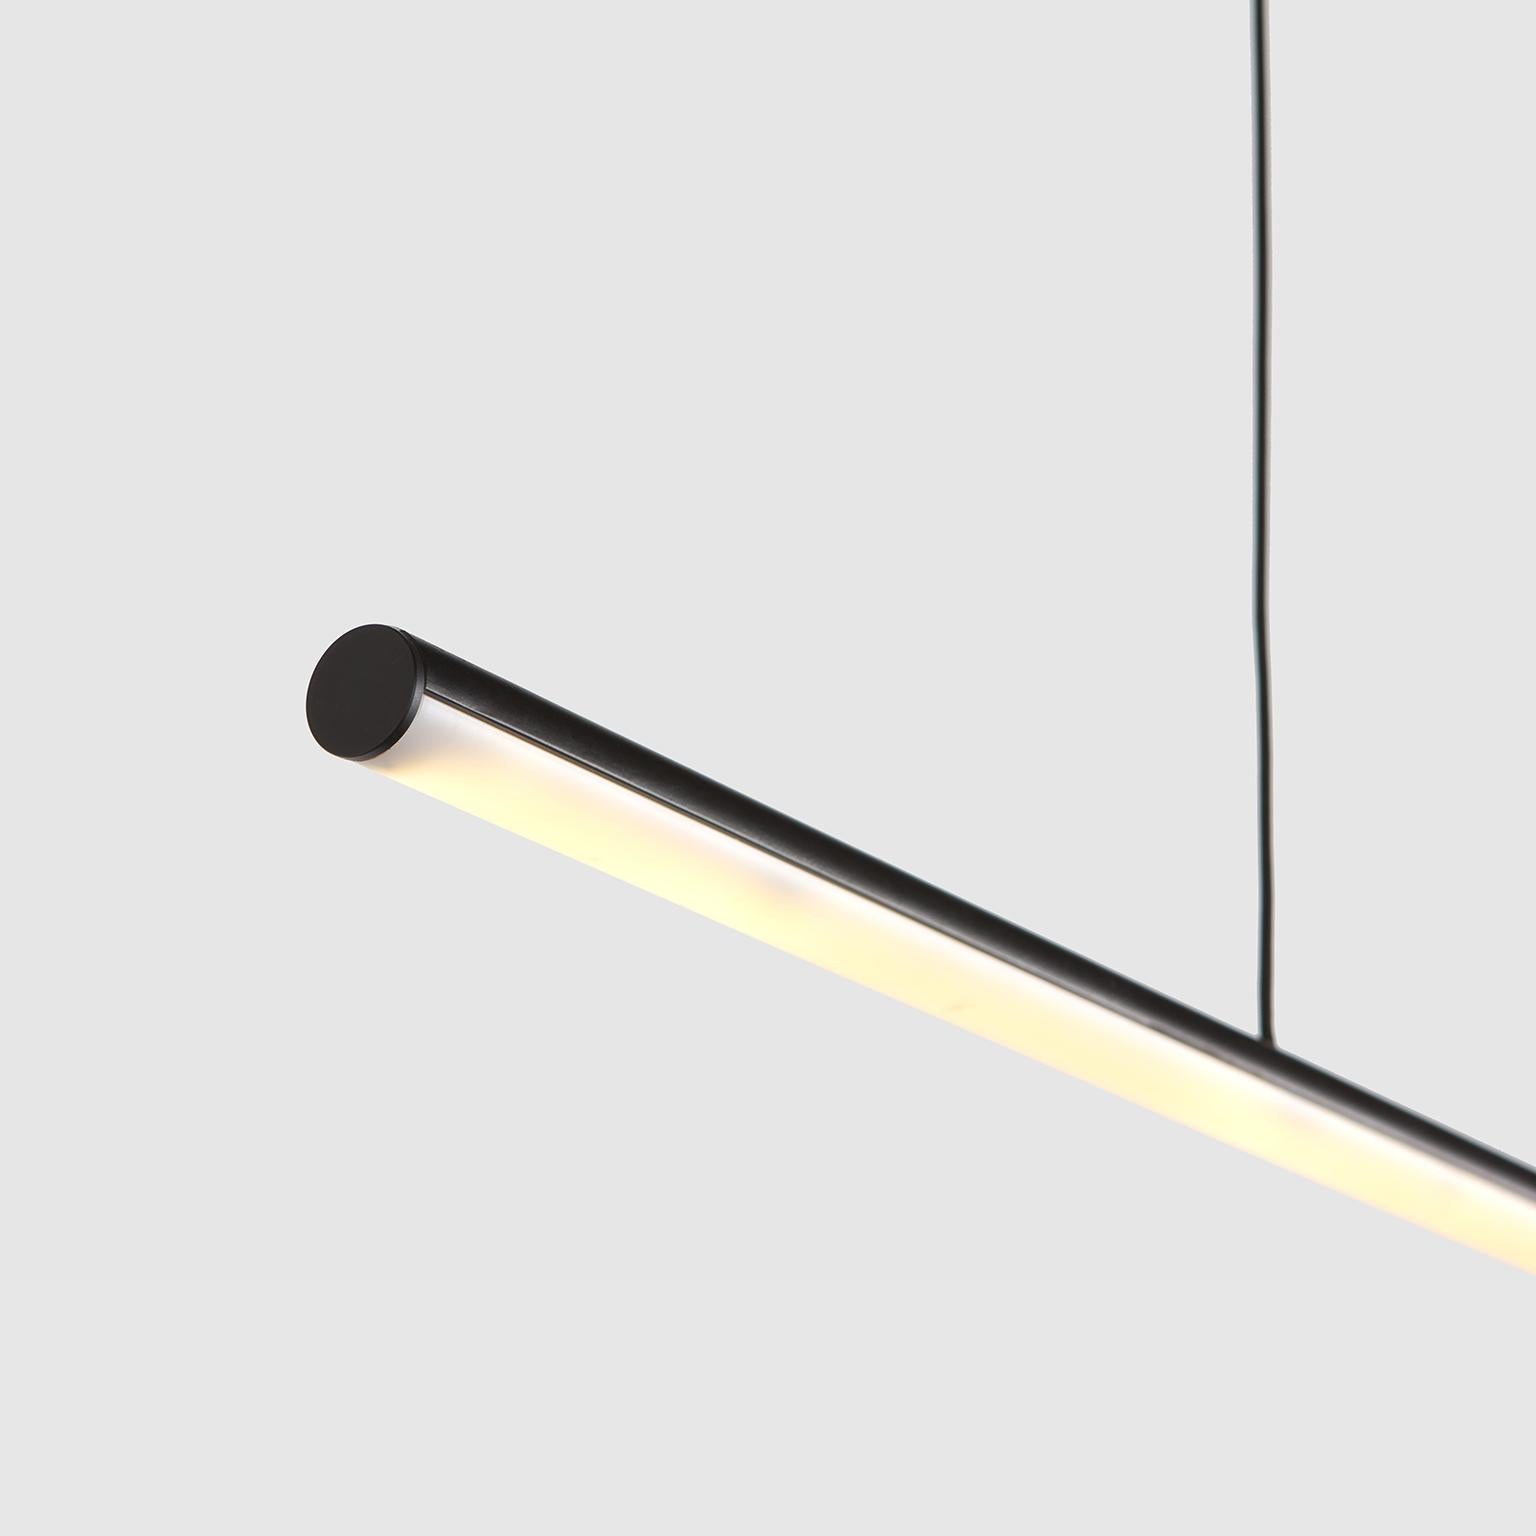 Formation stick pendant is a sleek, Minimalist extruded aluminum fixture ideally suited to hang above Kitchen islands, above works spaces and other environments that require functional yet minimal lighting.
The core design is a set of interlocking